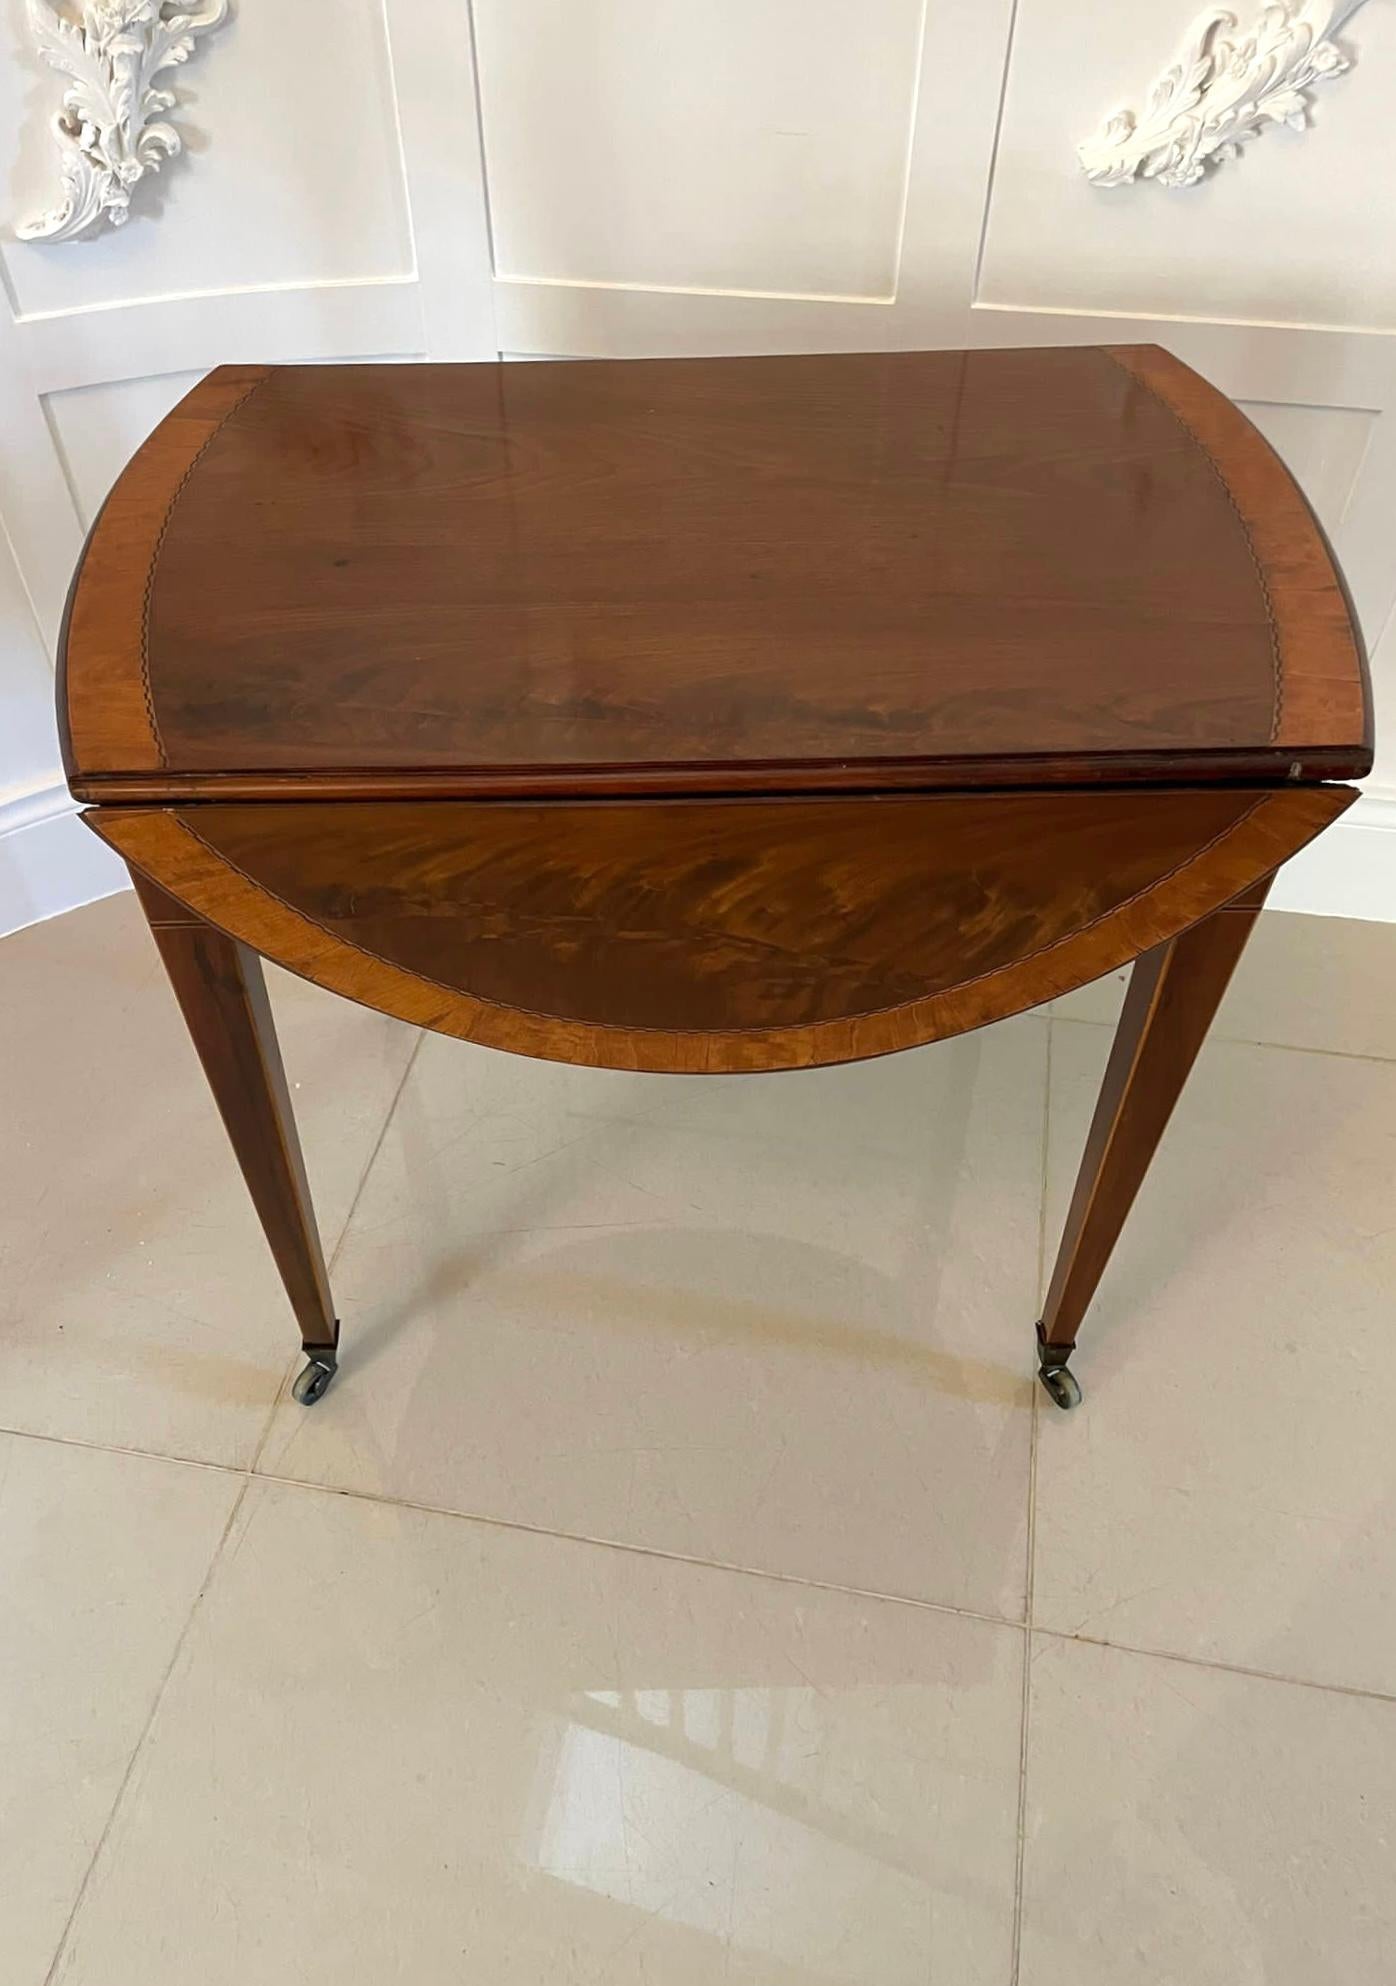 Fine Quality Antique Sheraton Period Inlaid Mahogany Pembroke Table In Good Condition For Sale In Suffolk, GB